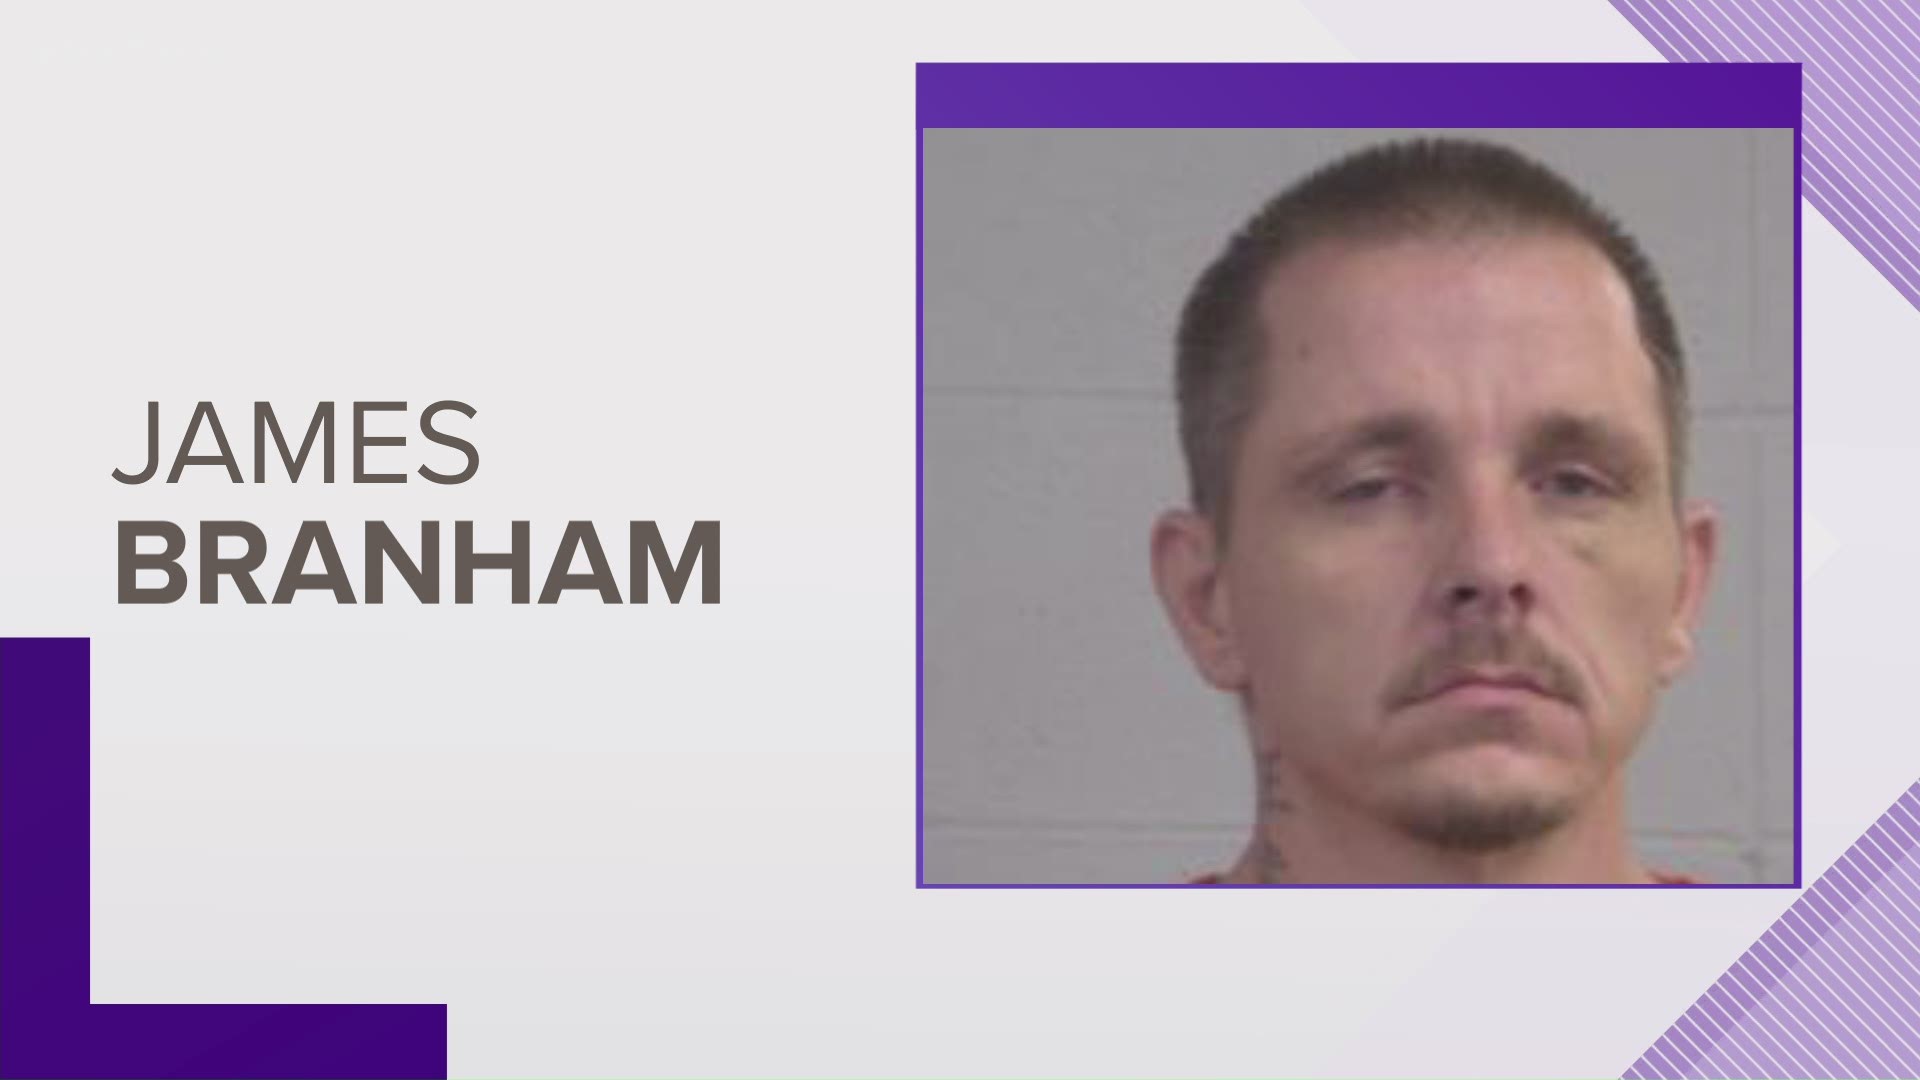 Authorities said 39-year-old James Branham has been arrested in connection to a kidnapping that led to the death of 35-year-old Jeremy Lind.